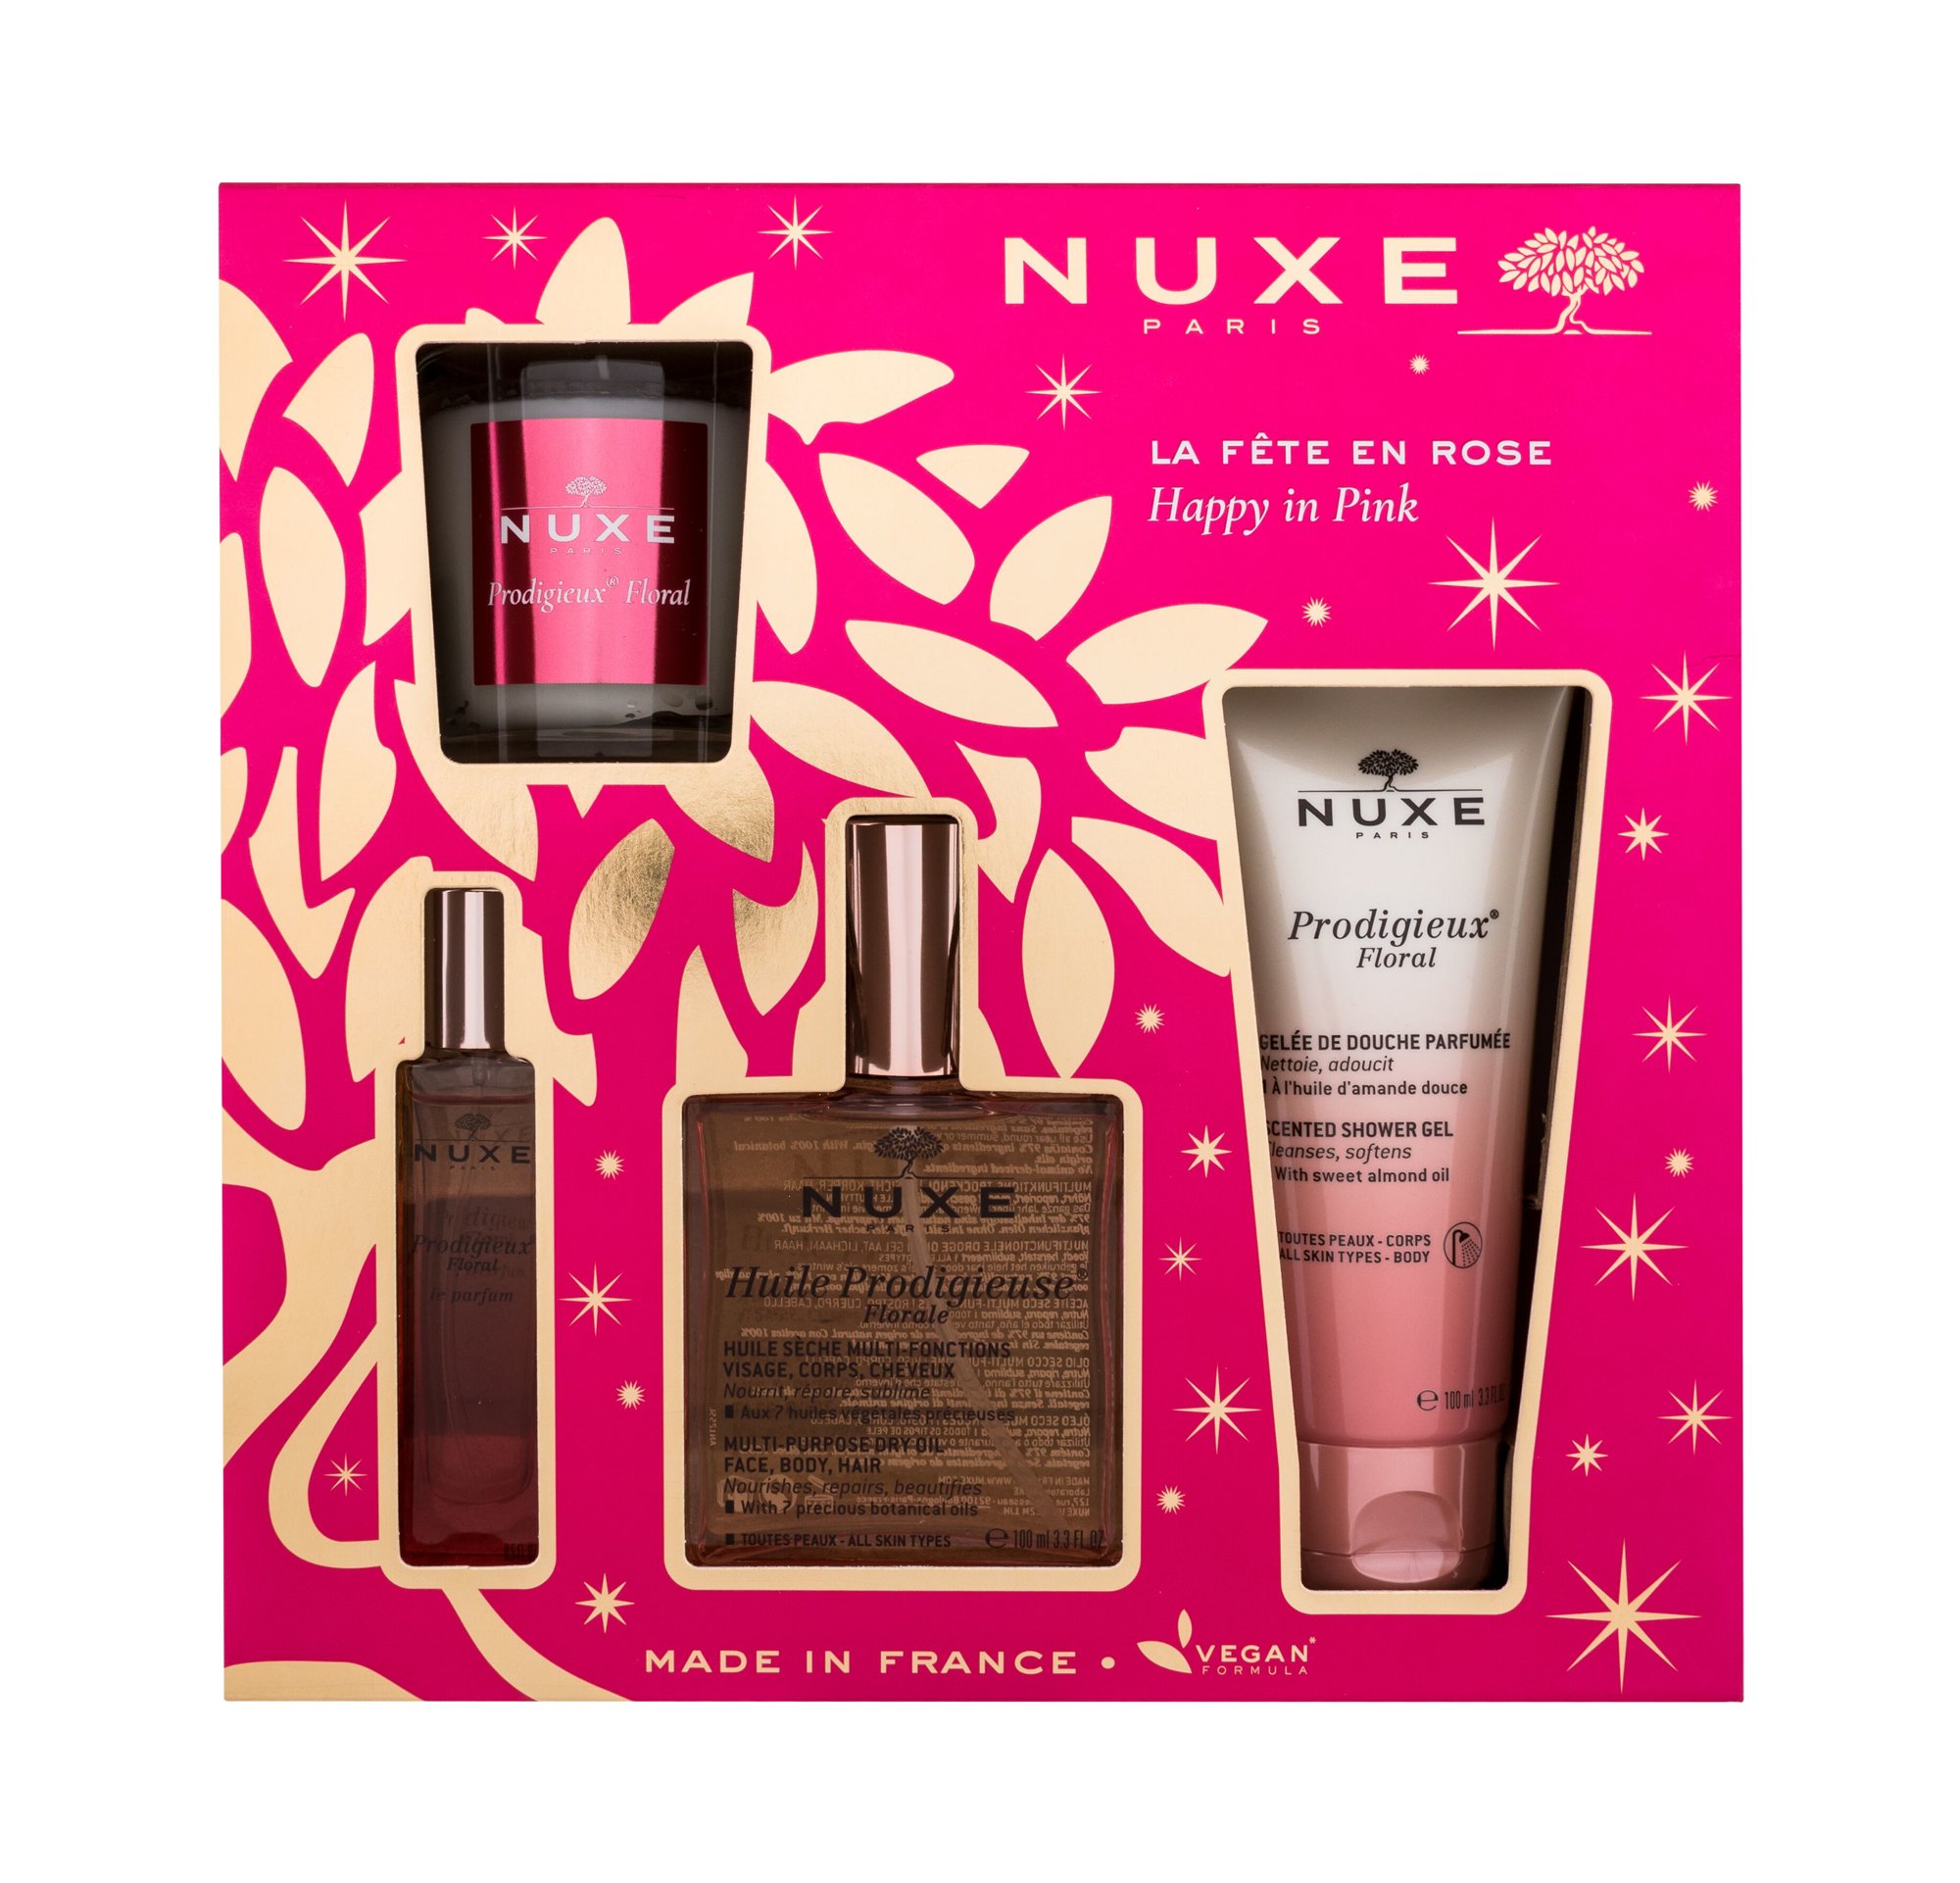 Nuxe Happy In Pink 100ml Dry Oil Huile Prodigieuse Florale 100 ml + Shower Gel Prodigieux Floral 100 ml + Edp Prodigieux Floral 15 ml +  Candle Prodigieux Floral 70 g kūno aliejus Rinkinys